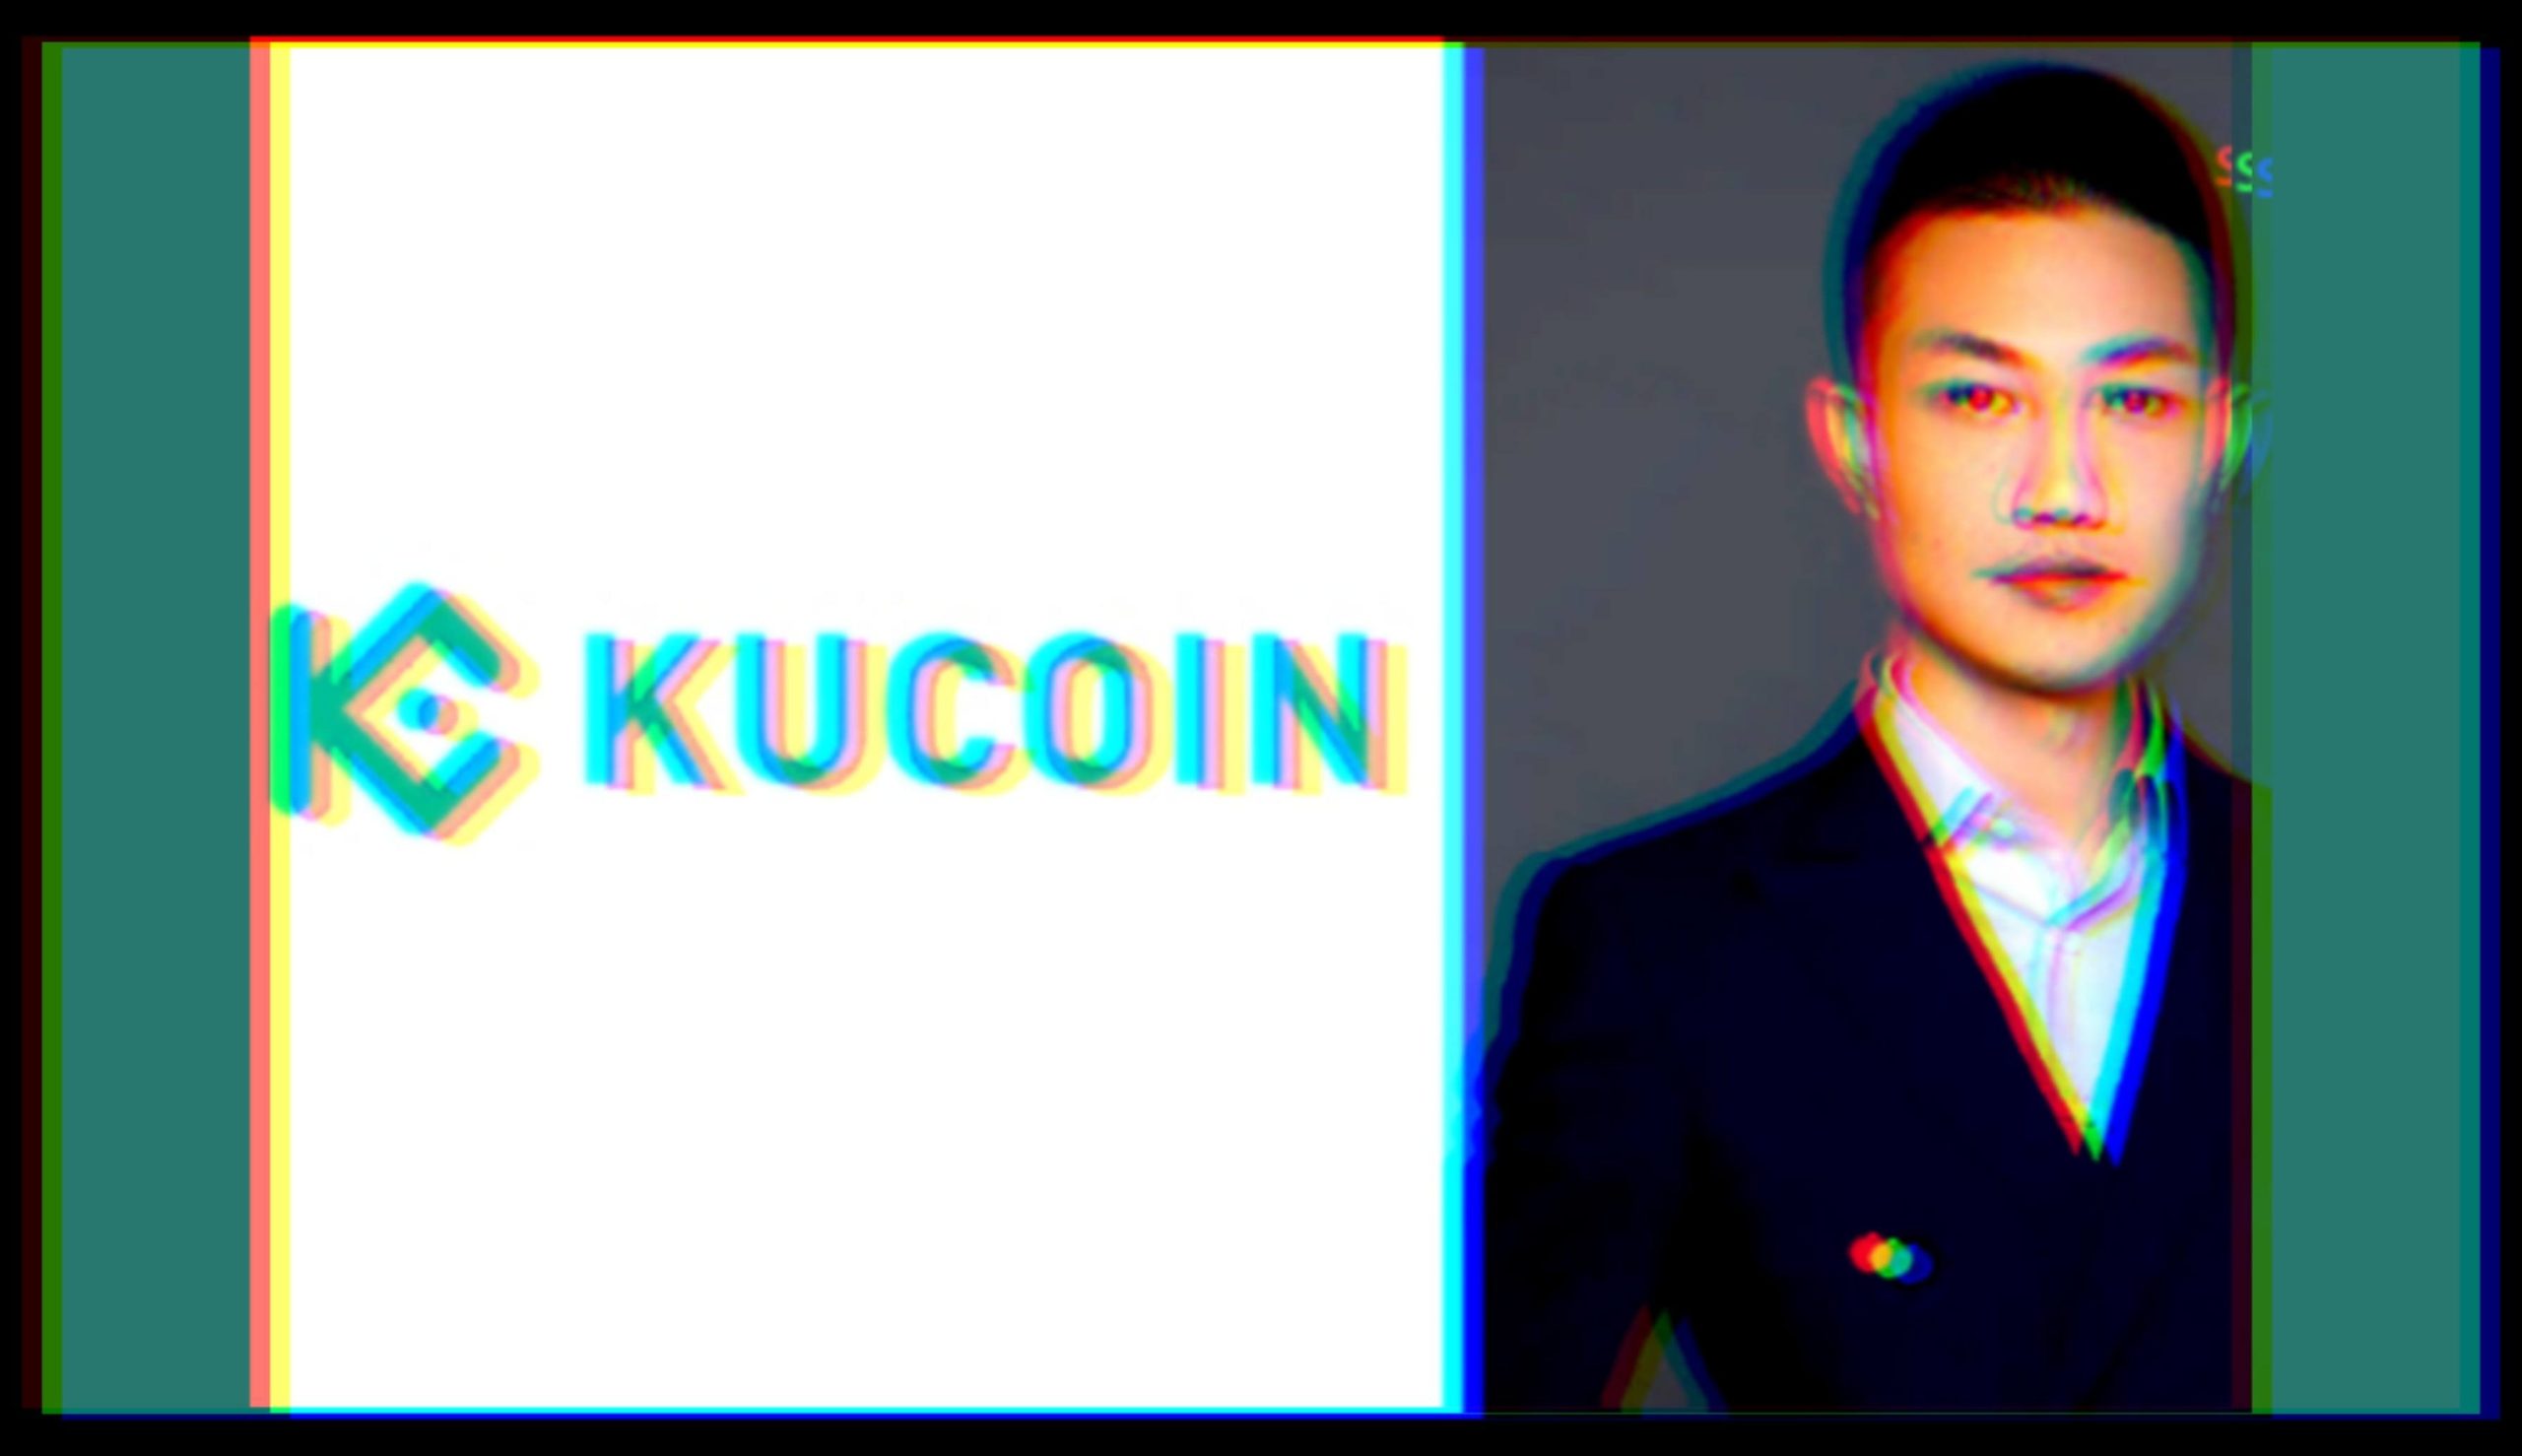 kucoin exchange retrenchment, follow the story from rumor to reality in this news